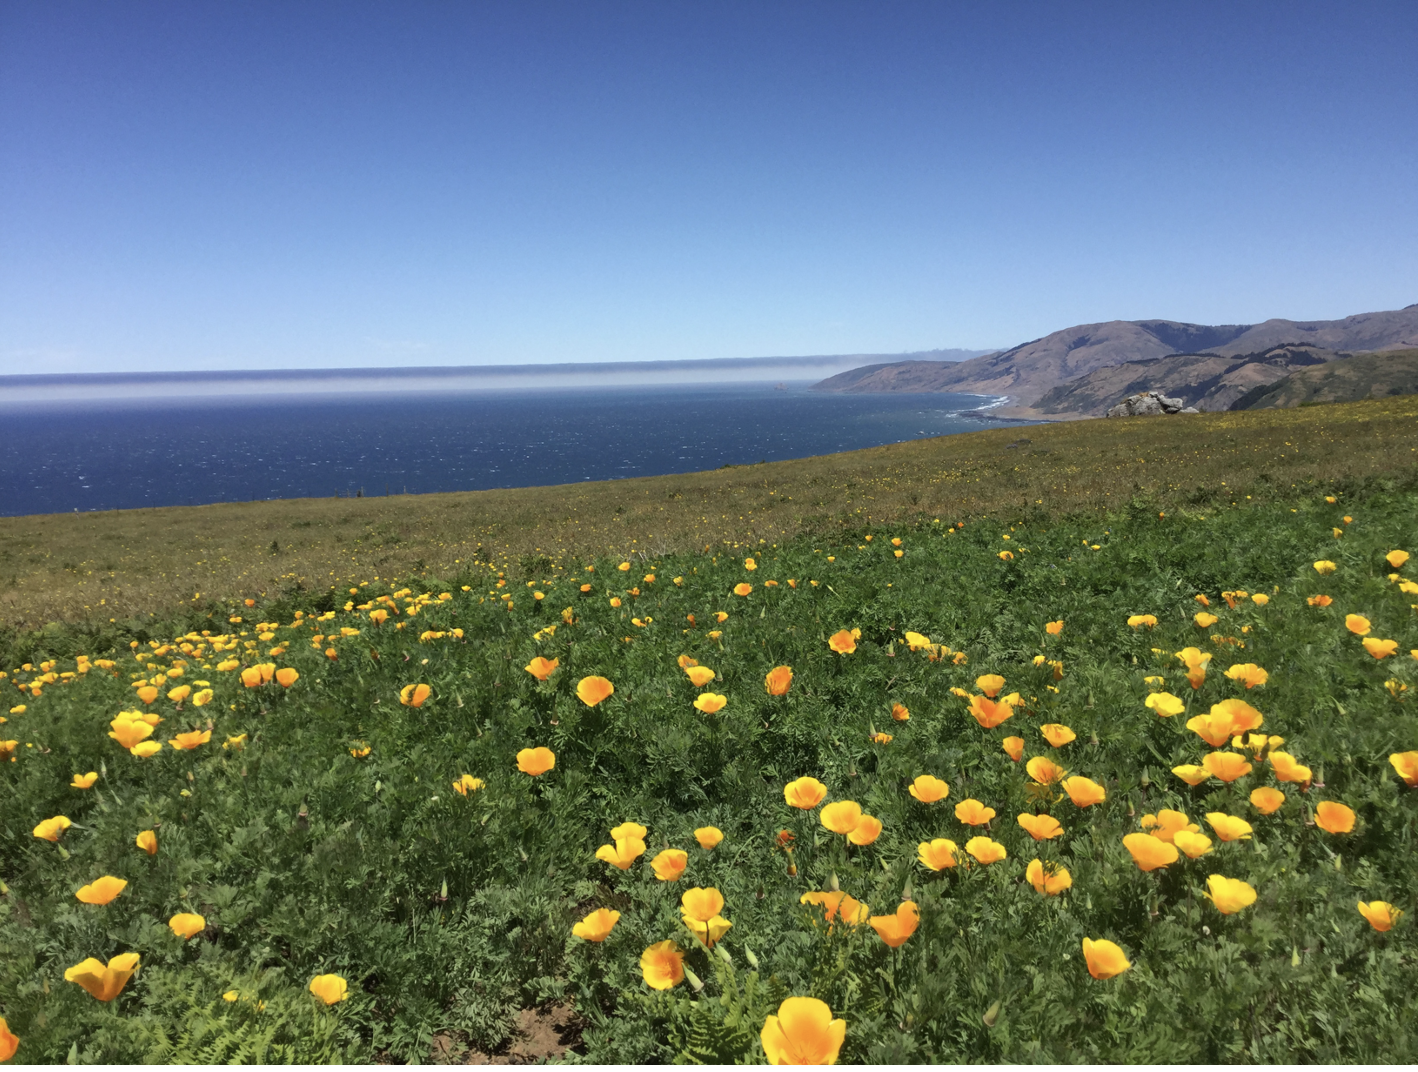 Image of a field of California poppies with the Pacific Ocean in the background